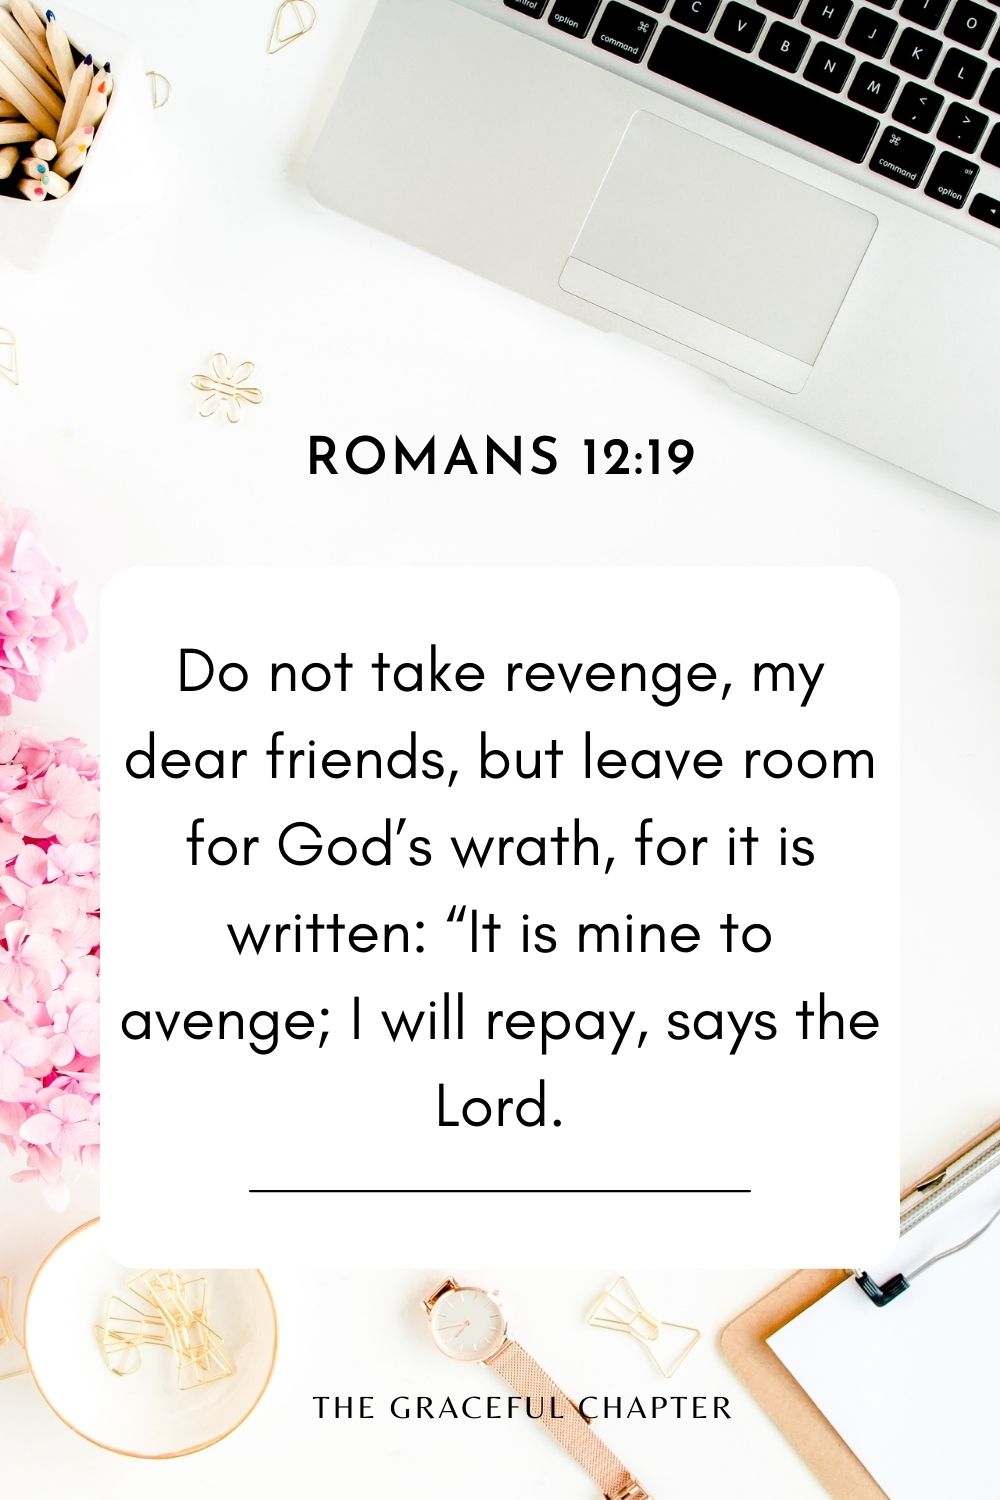 Do not take revenge, my dear friends, but leave room for God’s wrath, for it is written: “It is mine to avenge; I will repay, says the Lord. Romans 12:19